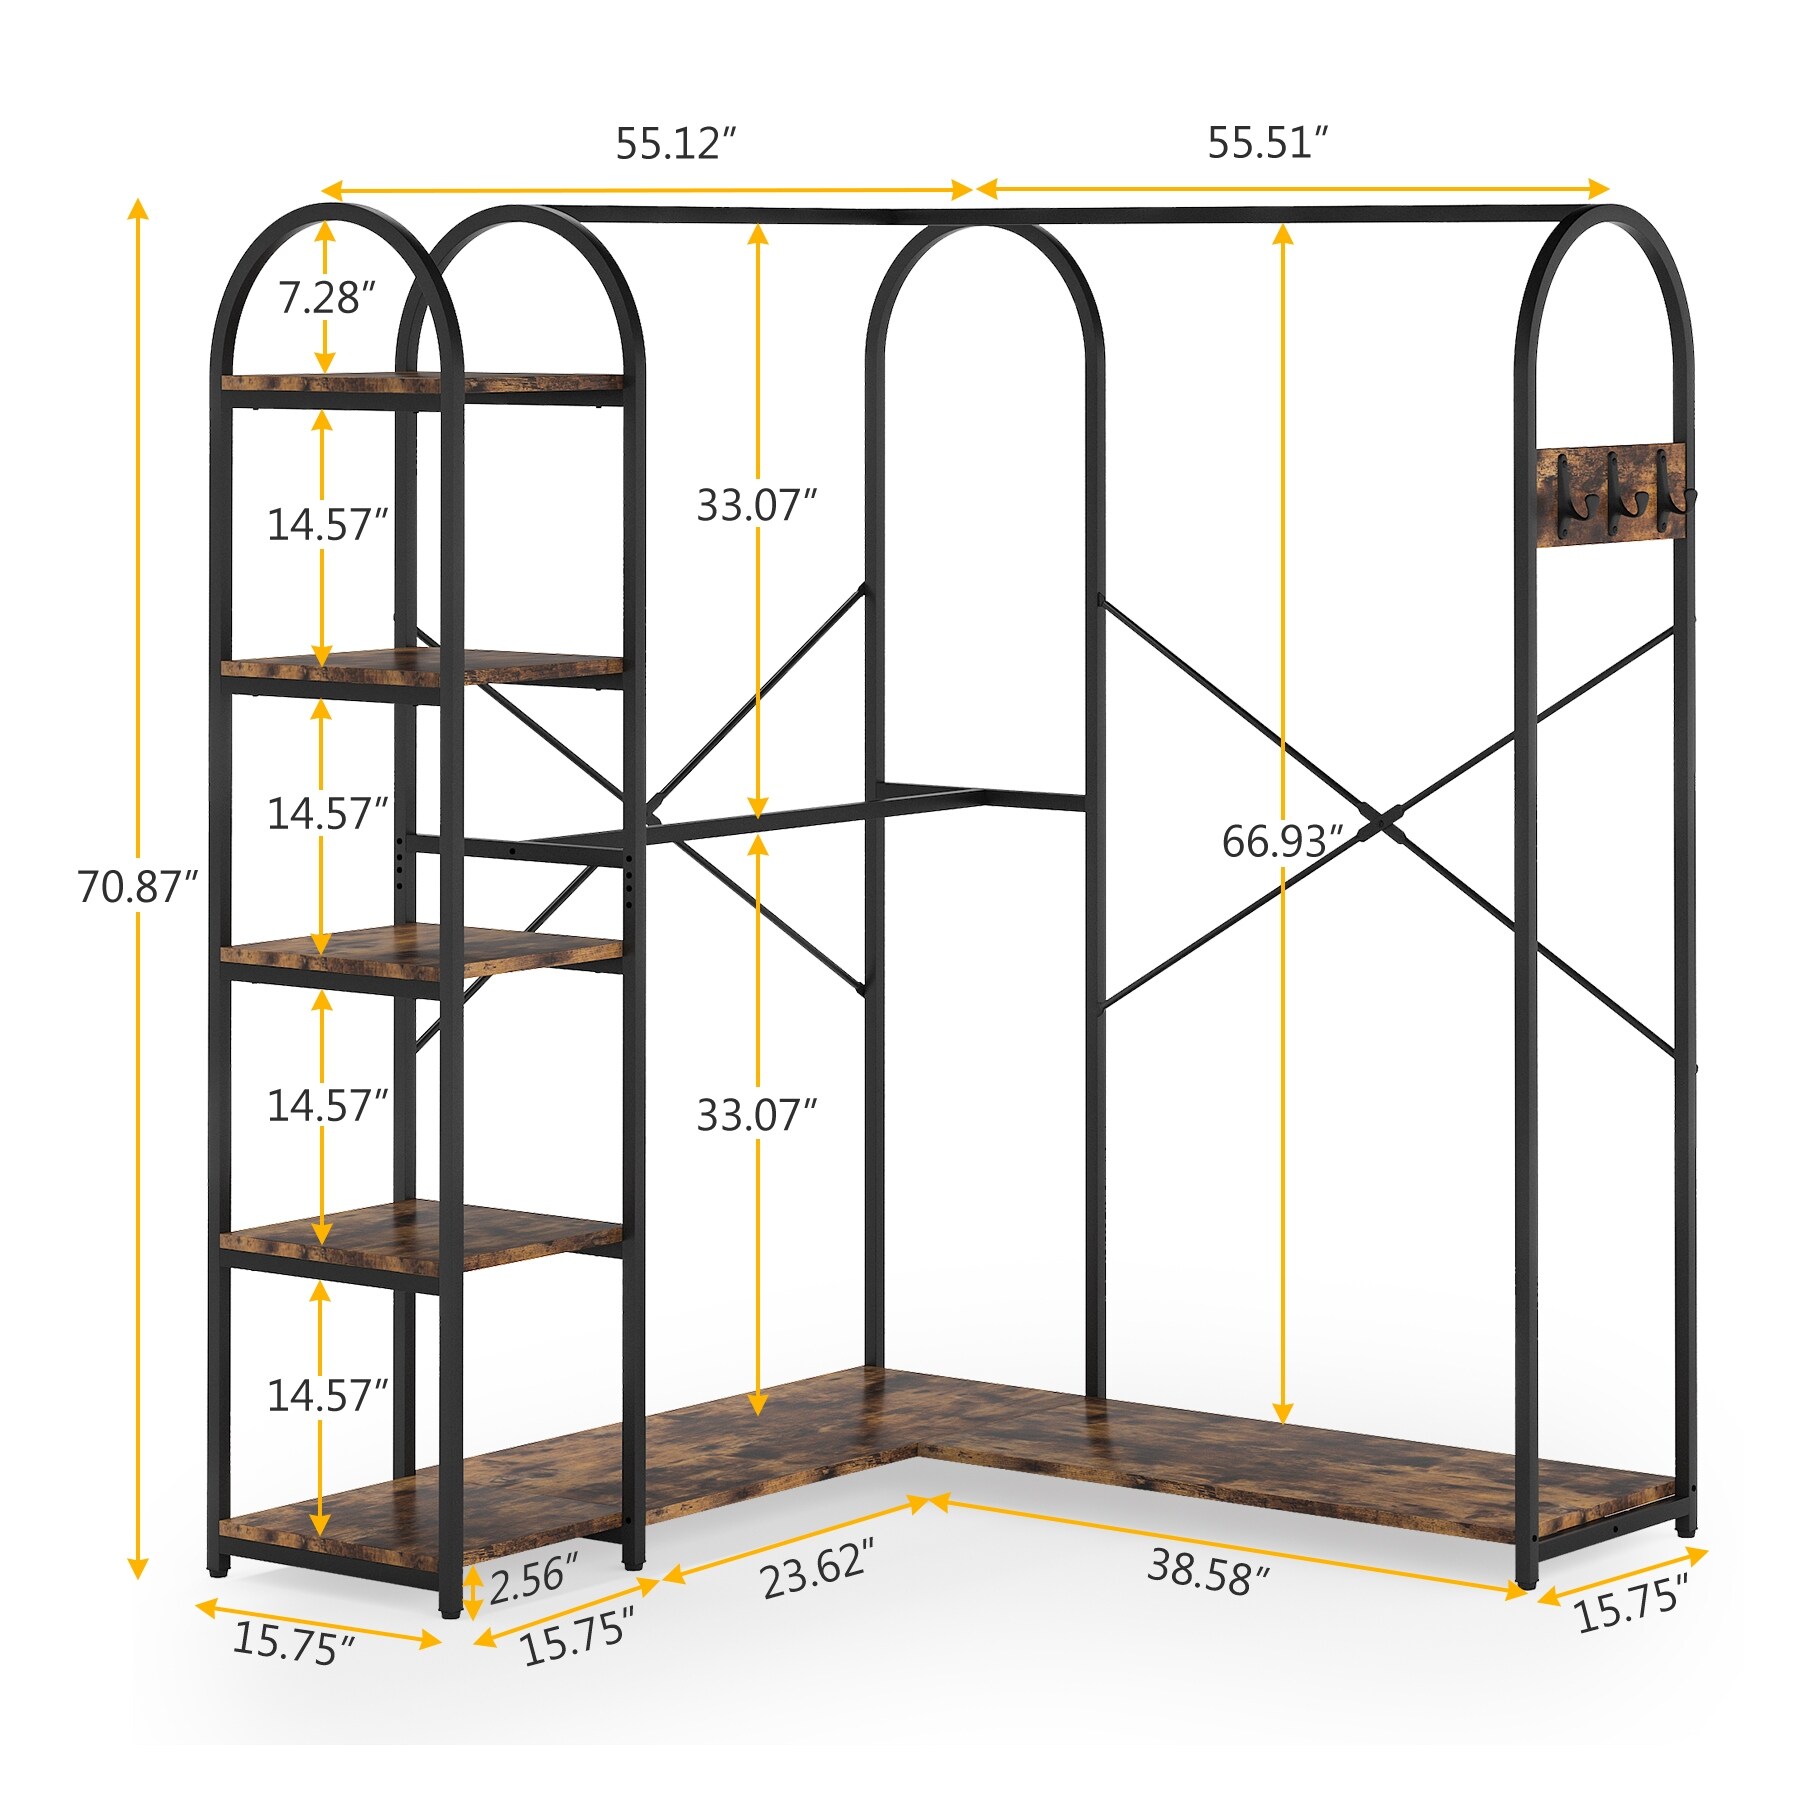 https://ak1.ostkcdn.com/images/products/is/images/direct/d013fa98ebbcb8e376fdcd8c586391aadb0ba764/Industrial-L-Shaped-Closet-Organizer%2C-Freestanding-Corner-Clothes-Garment-Rack-with-Hanging-Rods-and-Storage-Shelves.jpg